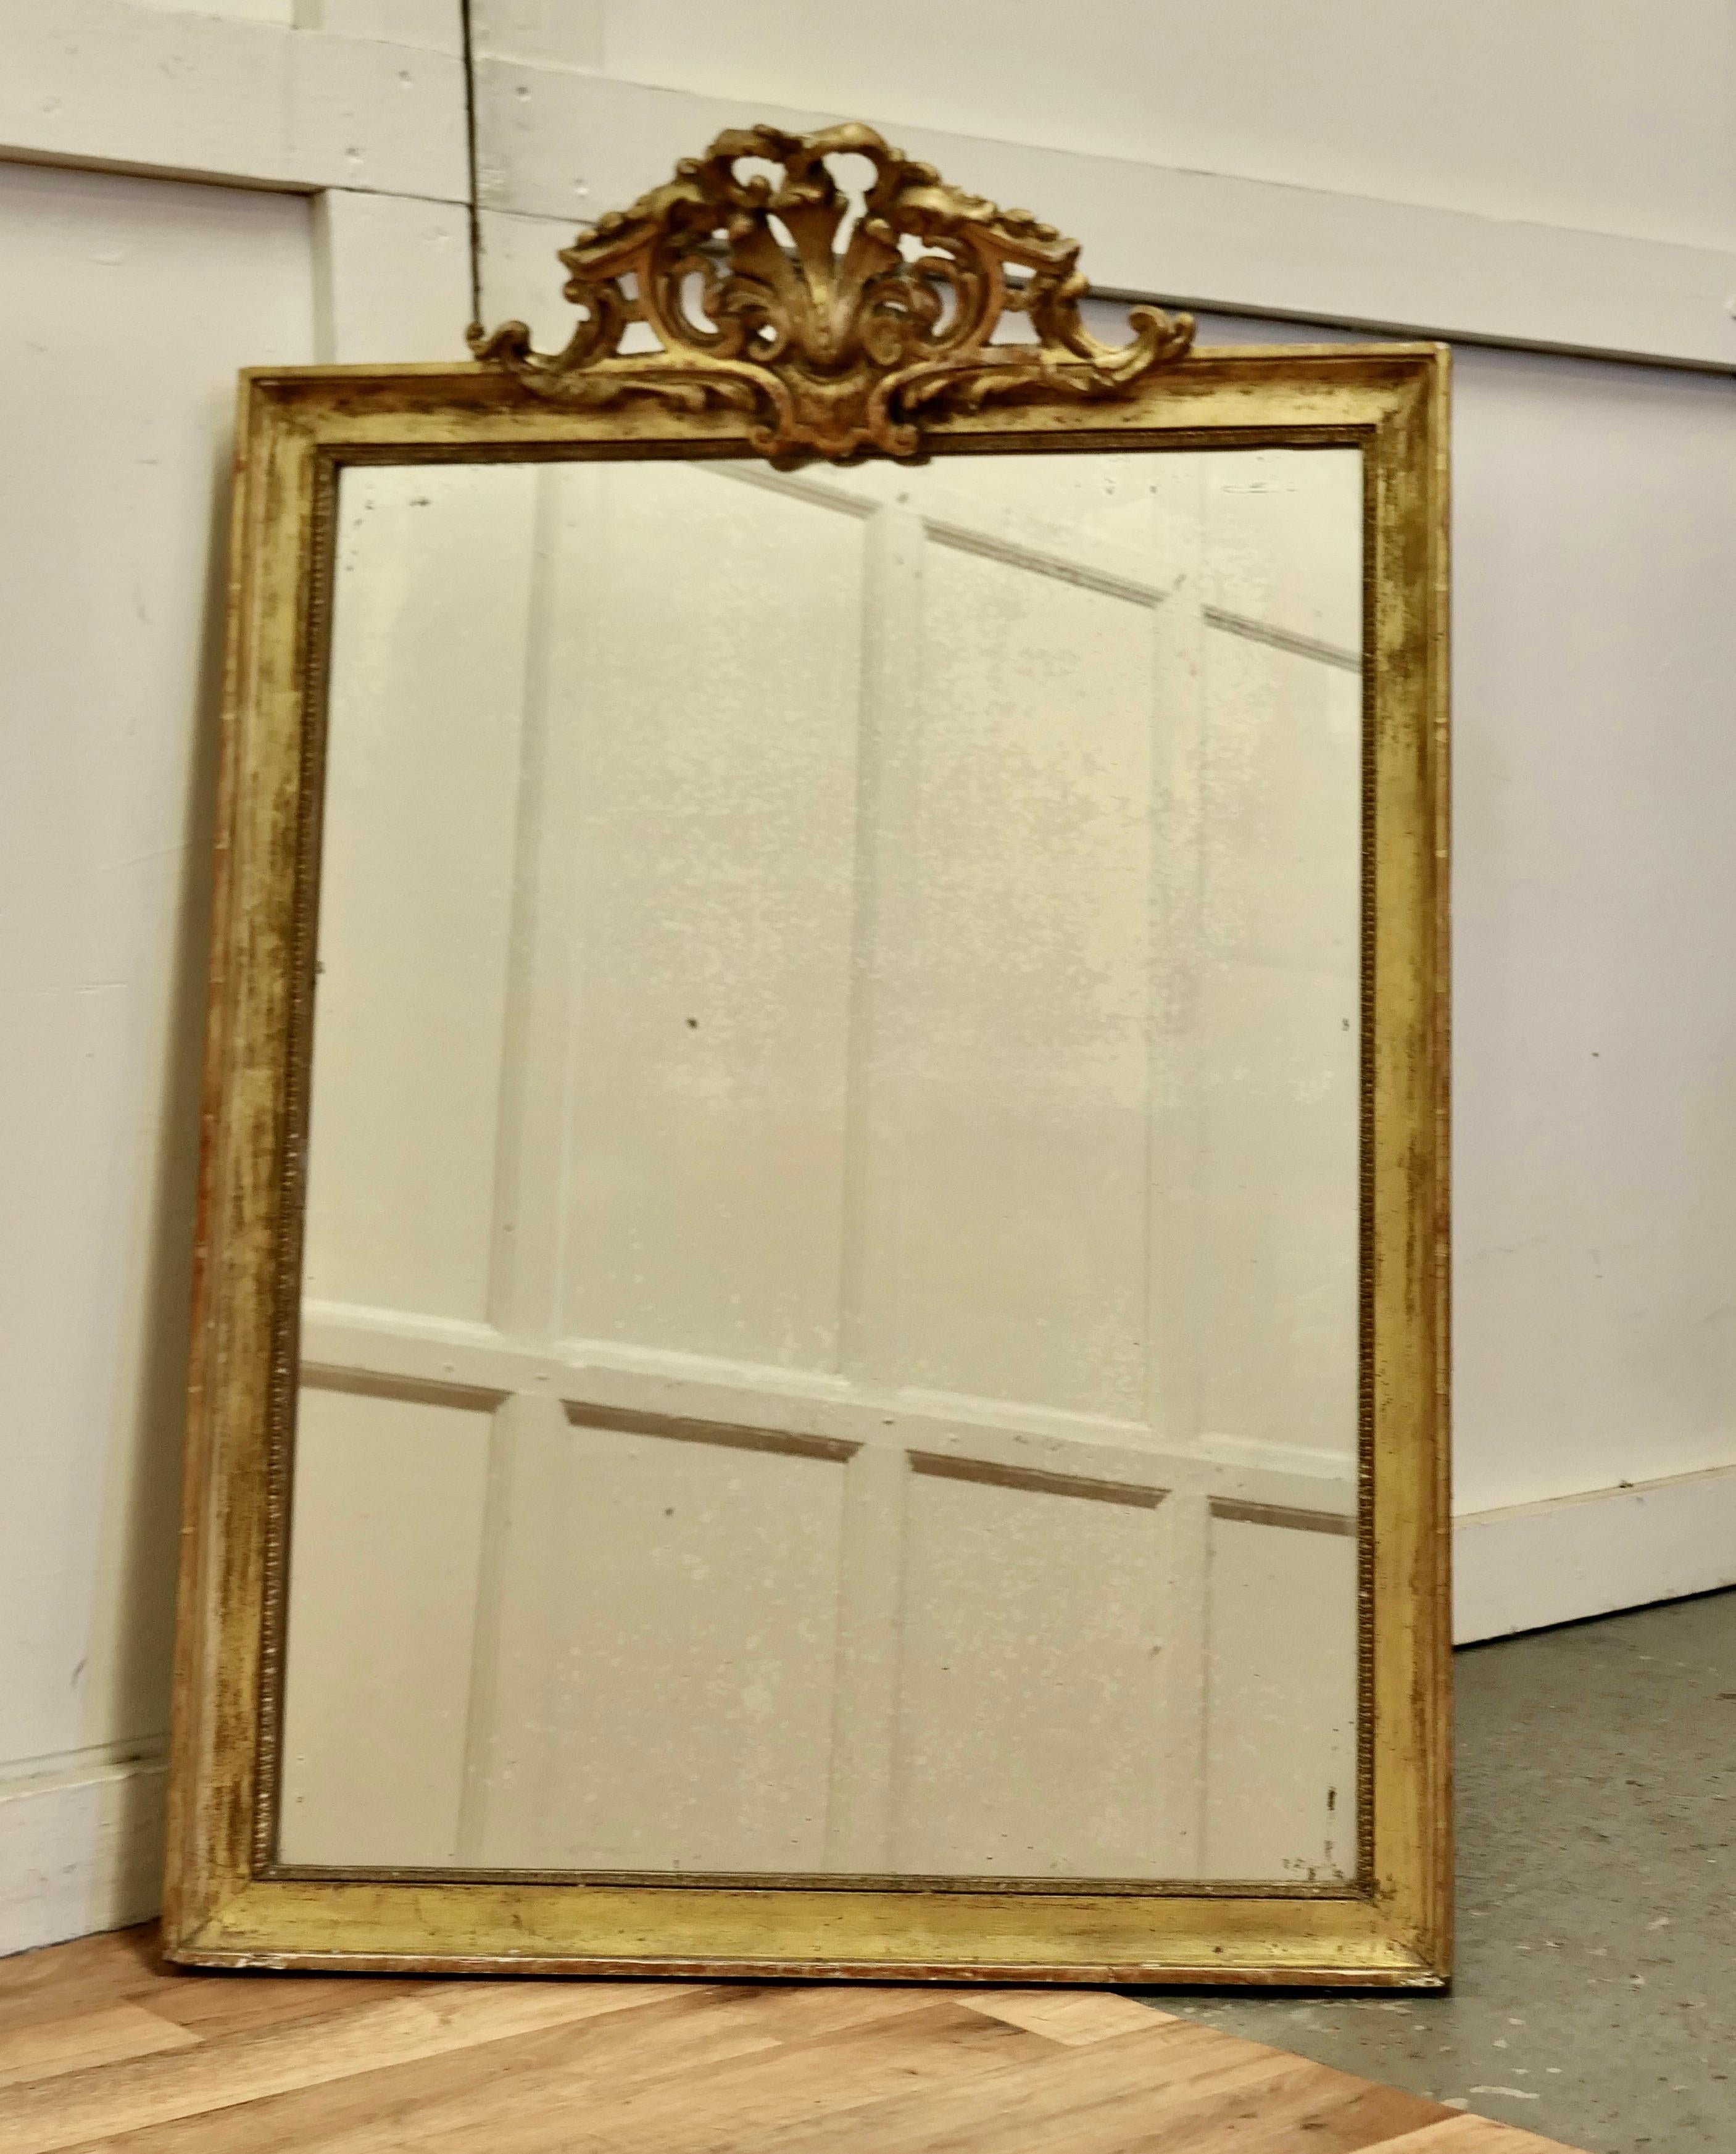 French faded pale gilt Pier mirror

The mirror has a very elaborate large pierced top decoration which hangs over the slightly shabby pale faded gilt frame, it is in good condition
The mercury glass as a slightly mottled foxing all over and there